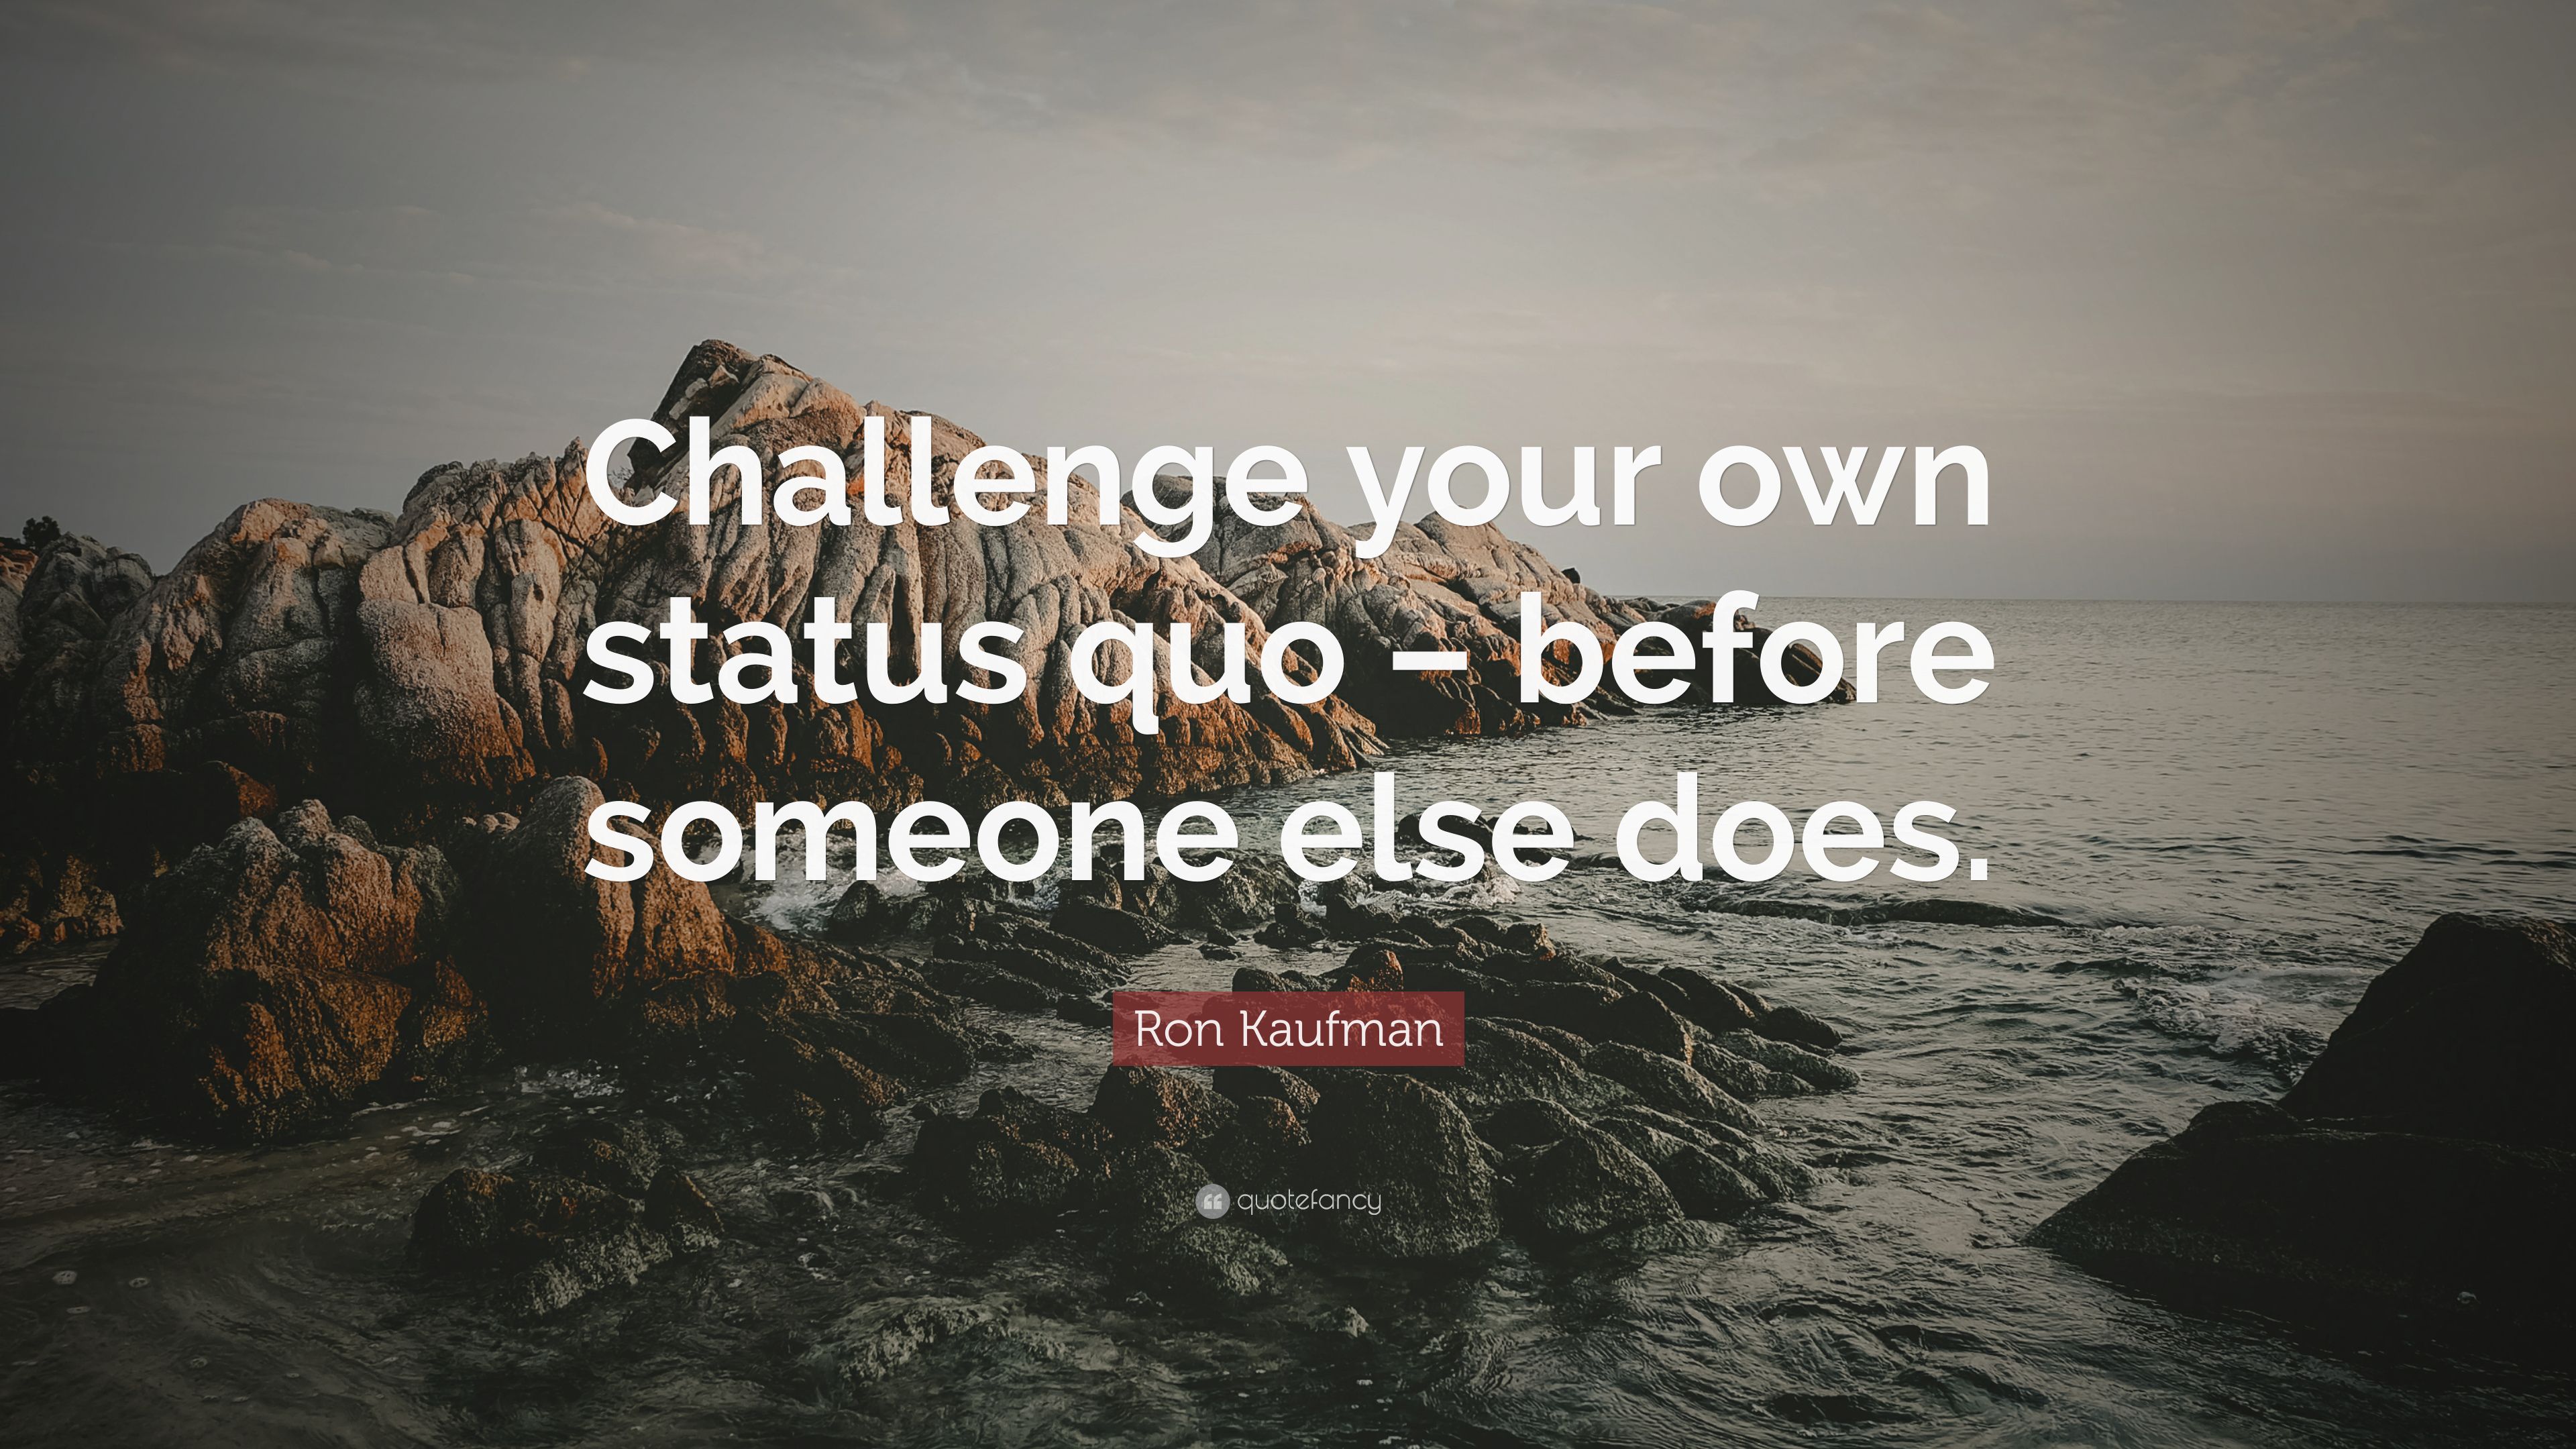 Ron Kaufman Quote: "Challenge your own status quo - before someone.